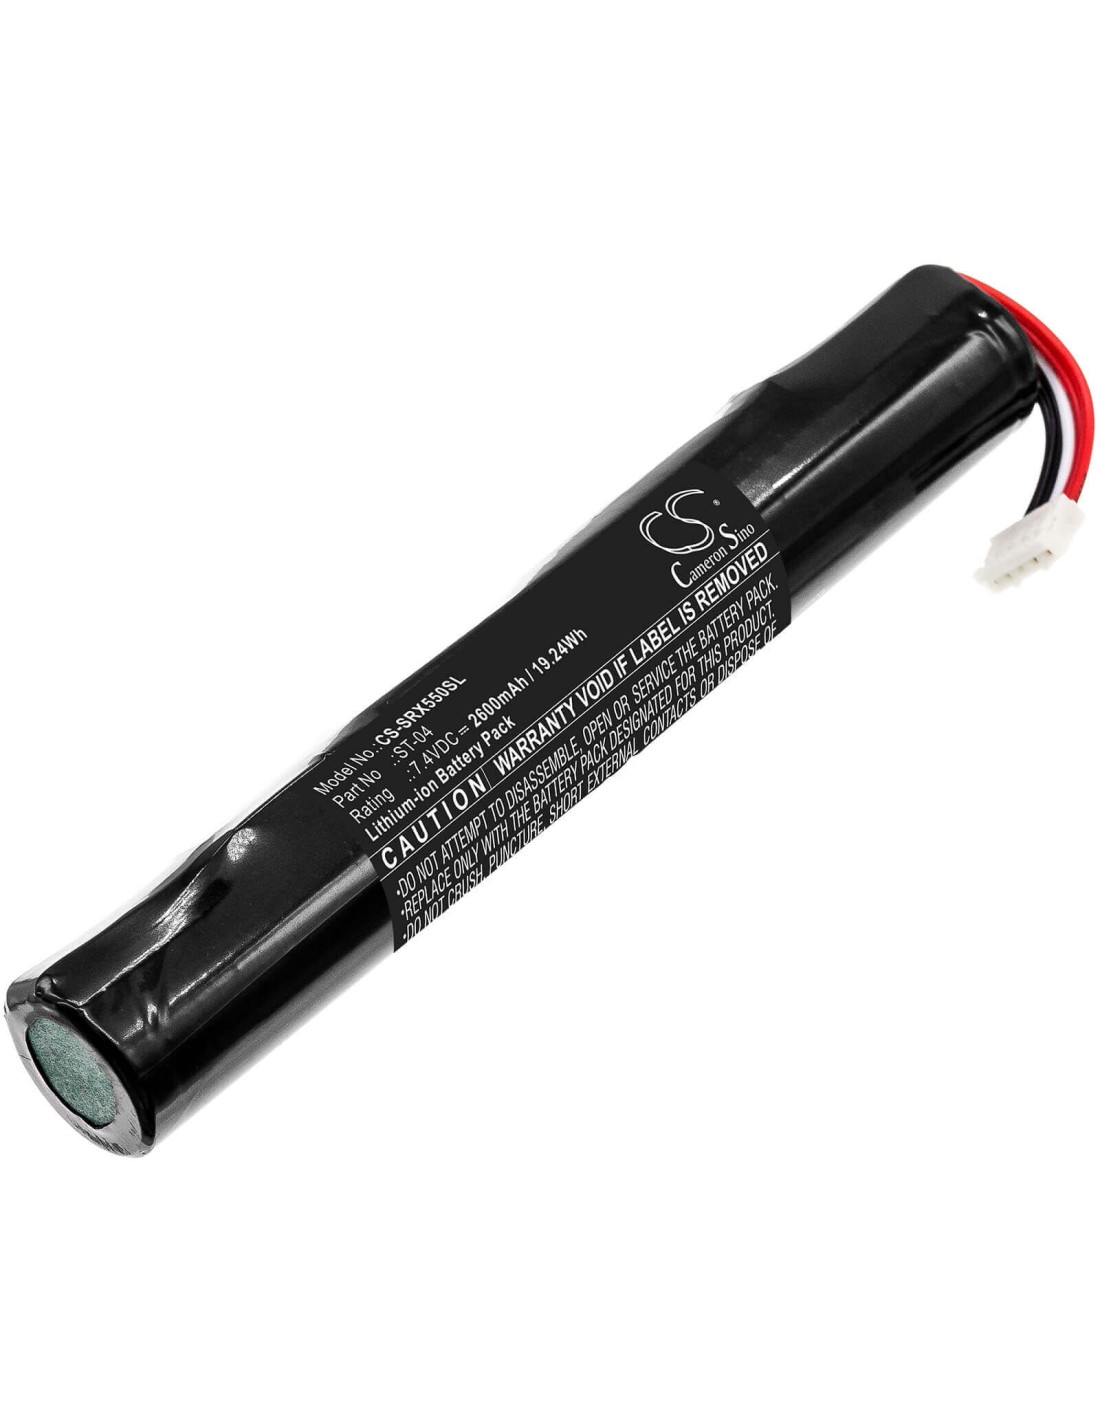 Battery for Sony, Srs-x55, Srs-x77 7.4V, 2600mAh - 19.24Wh